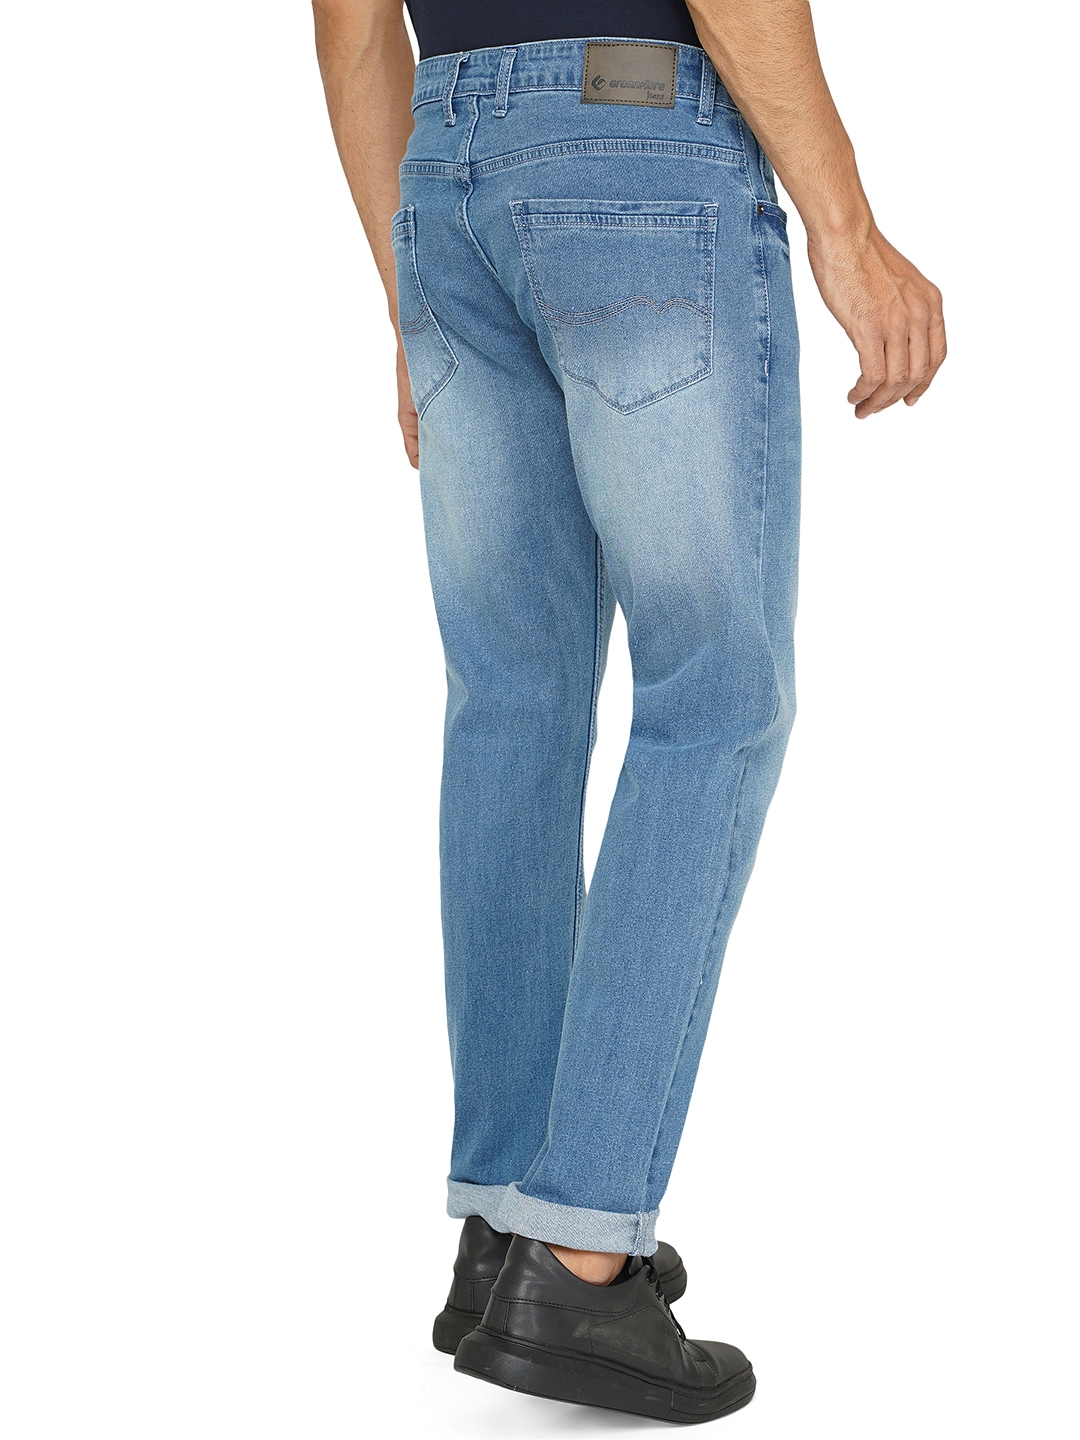 Greenfibre | Blue Washed Straight Fit Jeans | Greenfibre 2